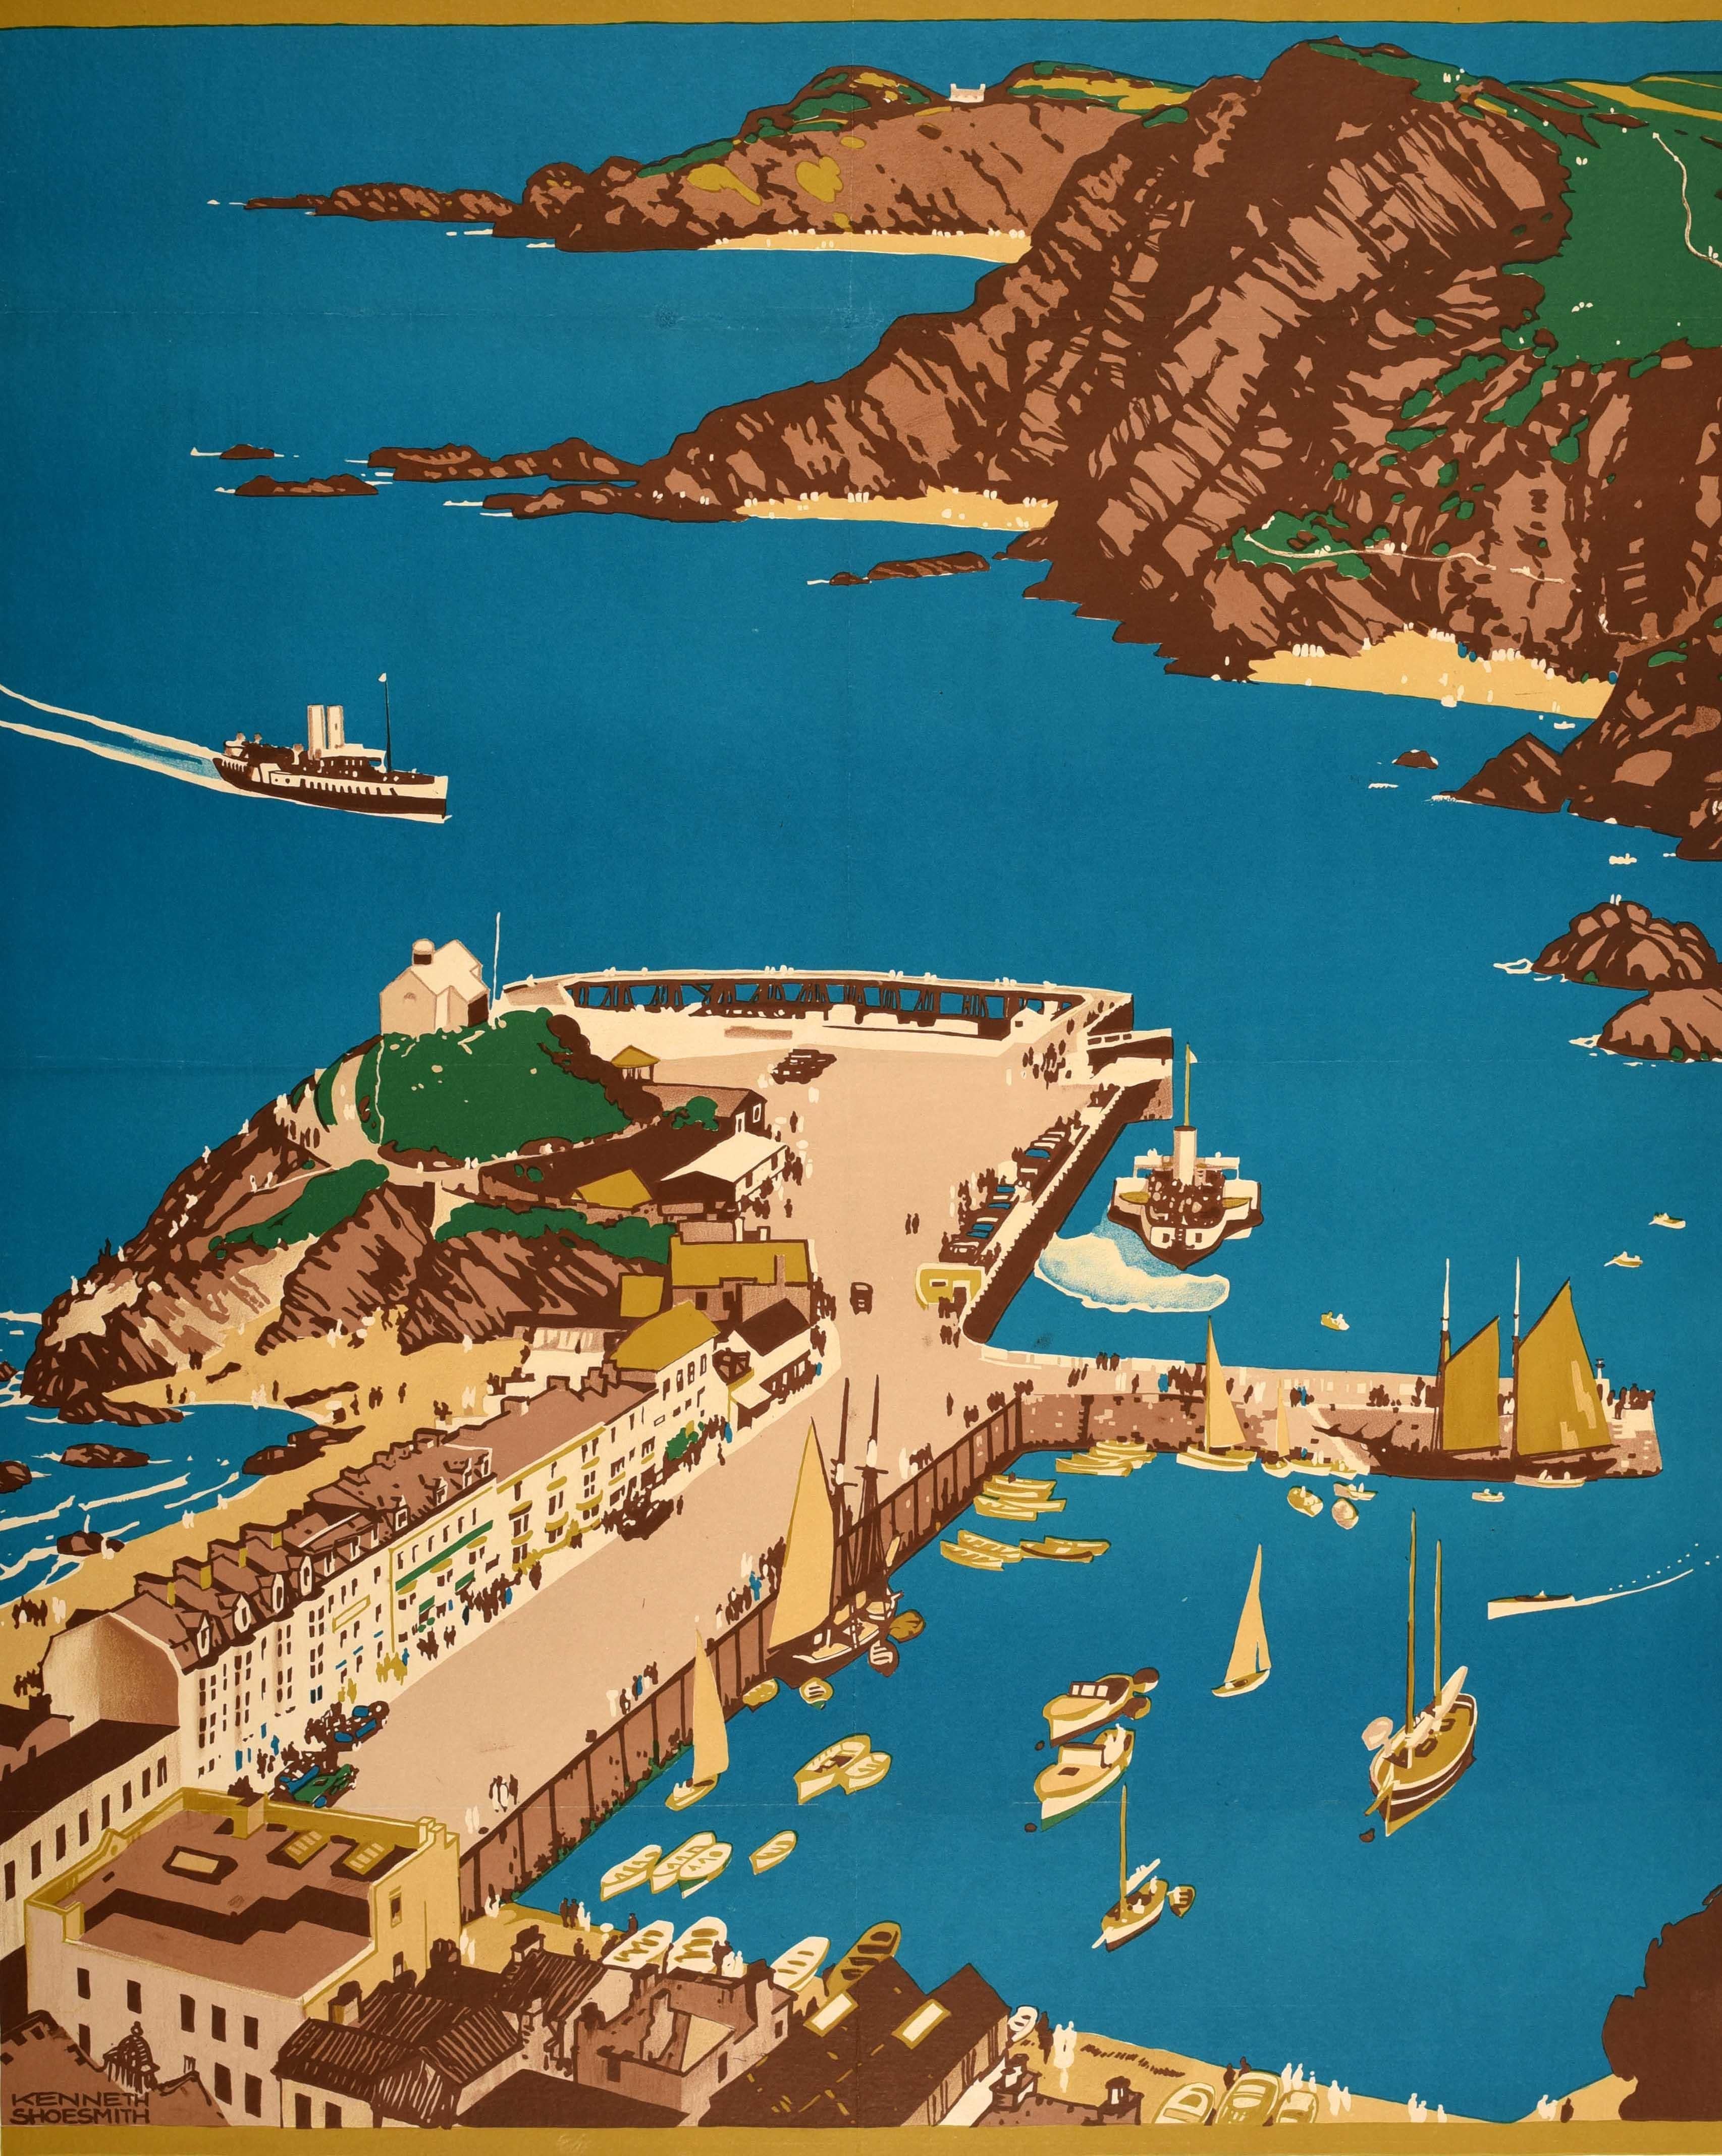 Original vintage train travel poster for Ilfracombe On Glorious Devon's Ocean Coast by Southern Railway featuring scenic artwork by the British maritime artist Kenneth Denton Shoesmith (1890-1939) of a bird's-eye view over the seaside resort town